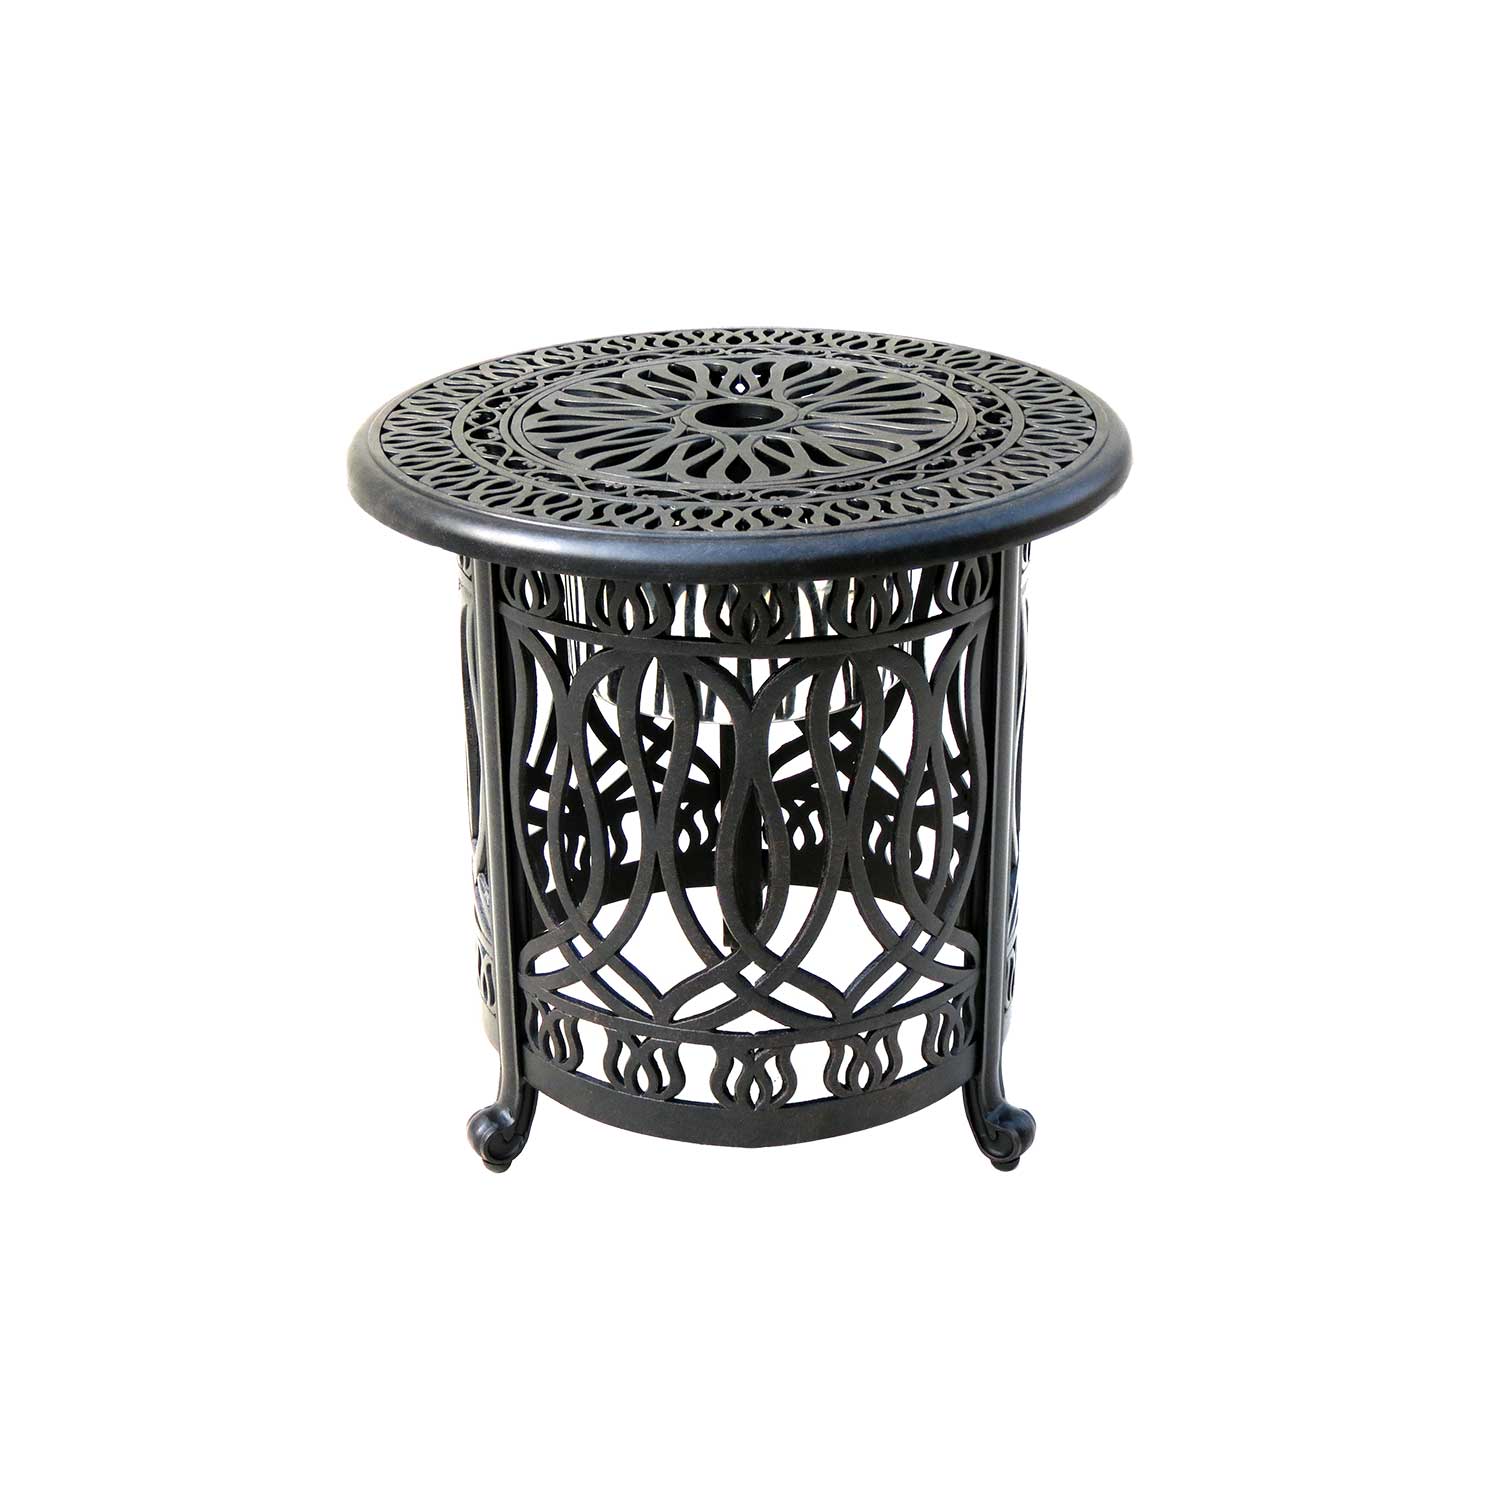 monarch series accent table outdoor furniture small patio corner wine rack affordable marble coffee decorative items black mirrored nightstand wall mounted round bar height